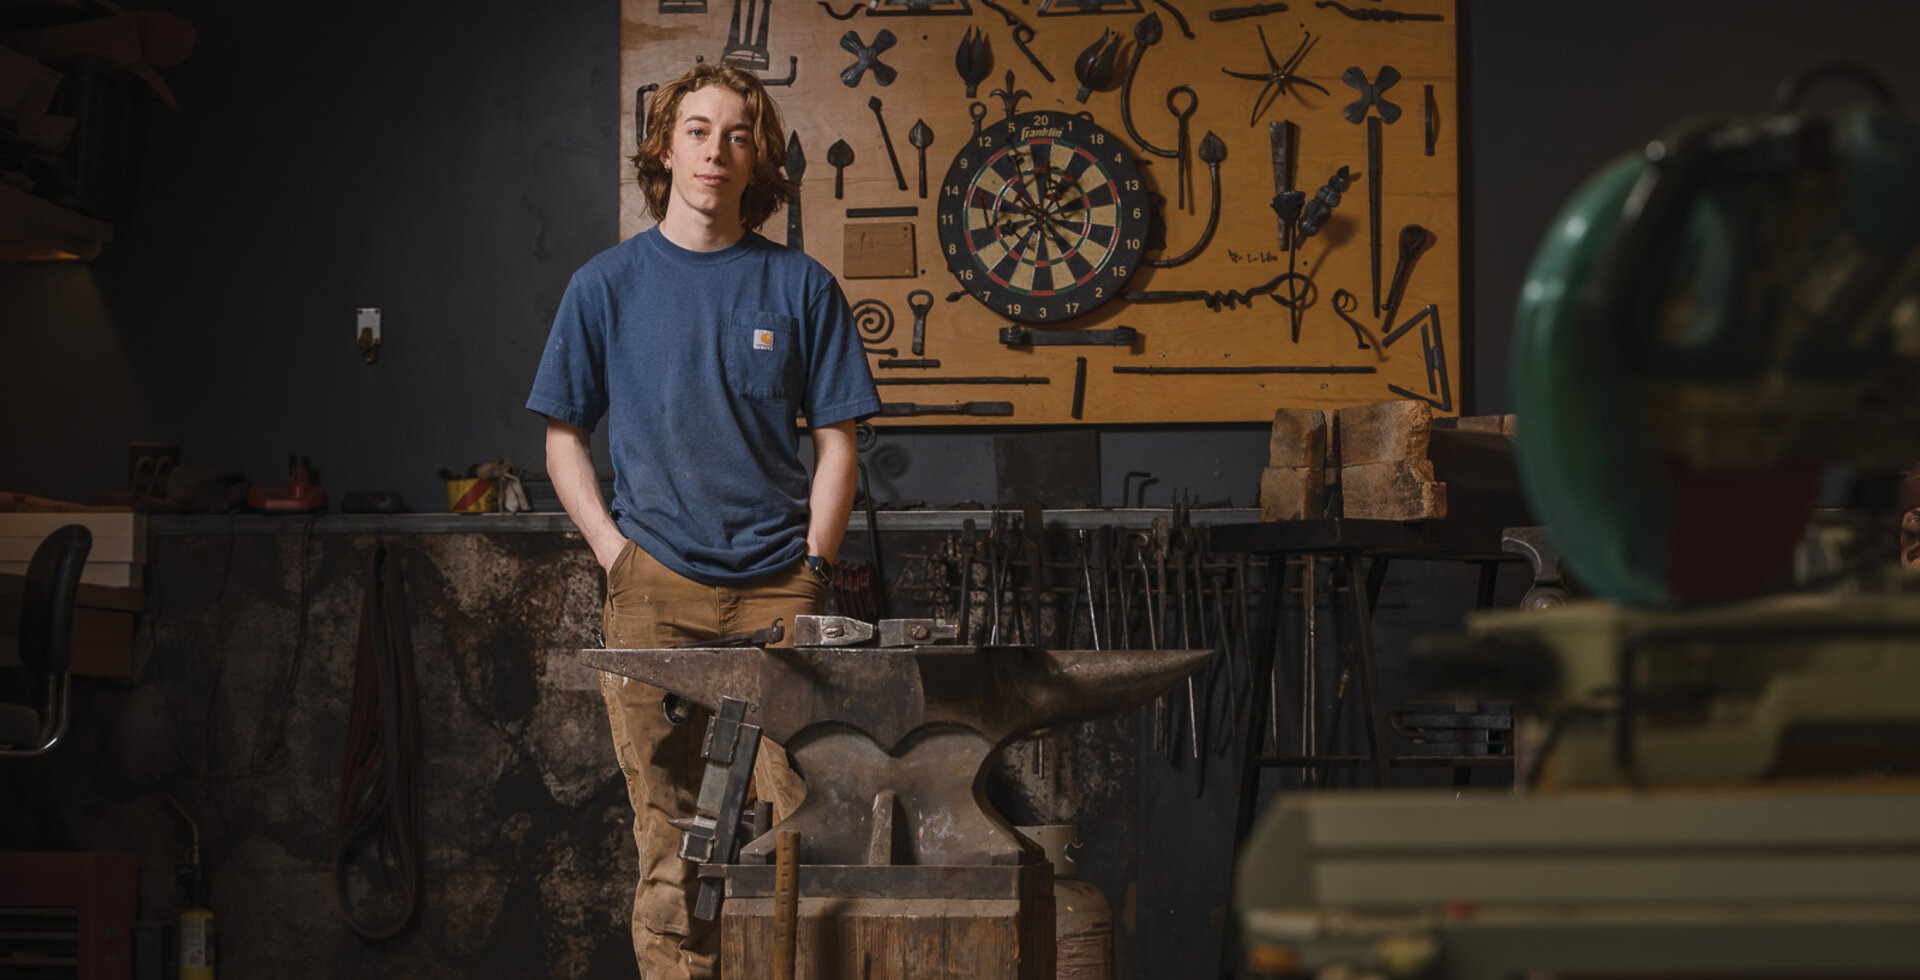 At 17 years old, Angus Kellems is an accomplished bladesmith. At his workshop in Hood River, he uses his late father’s anvil to sculpt his creations.